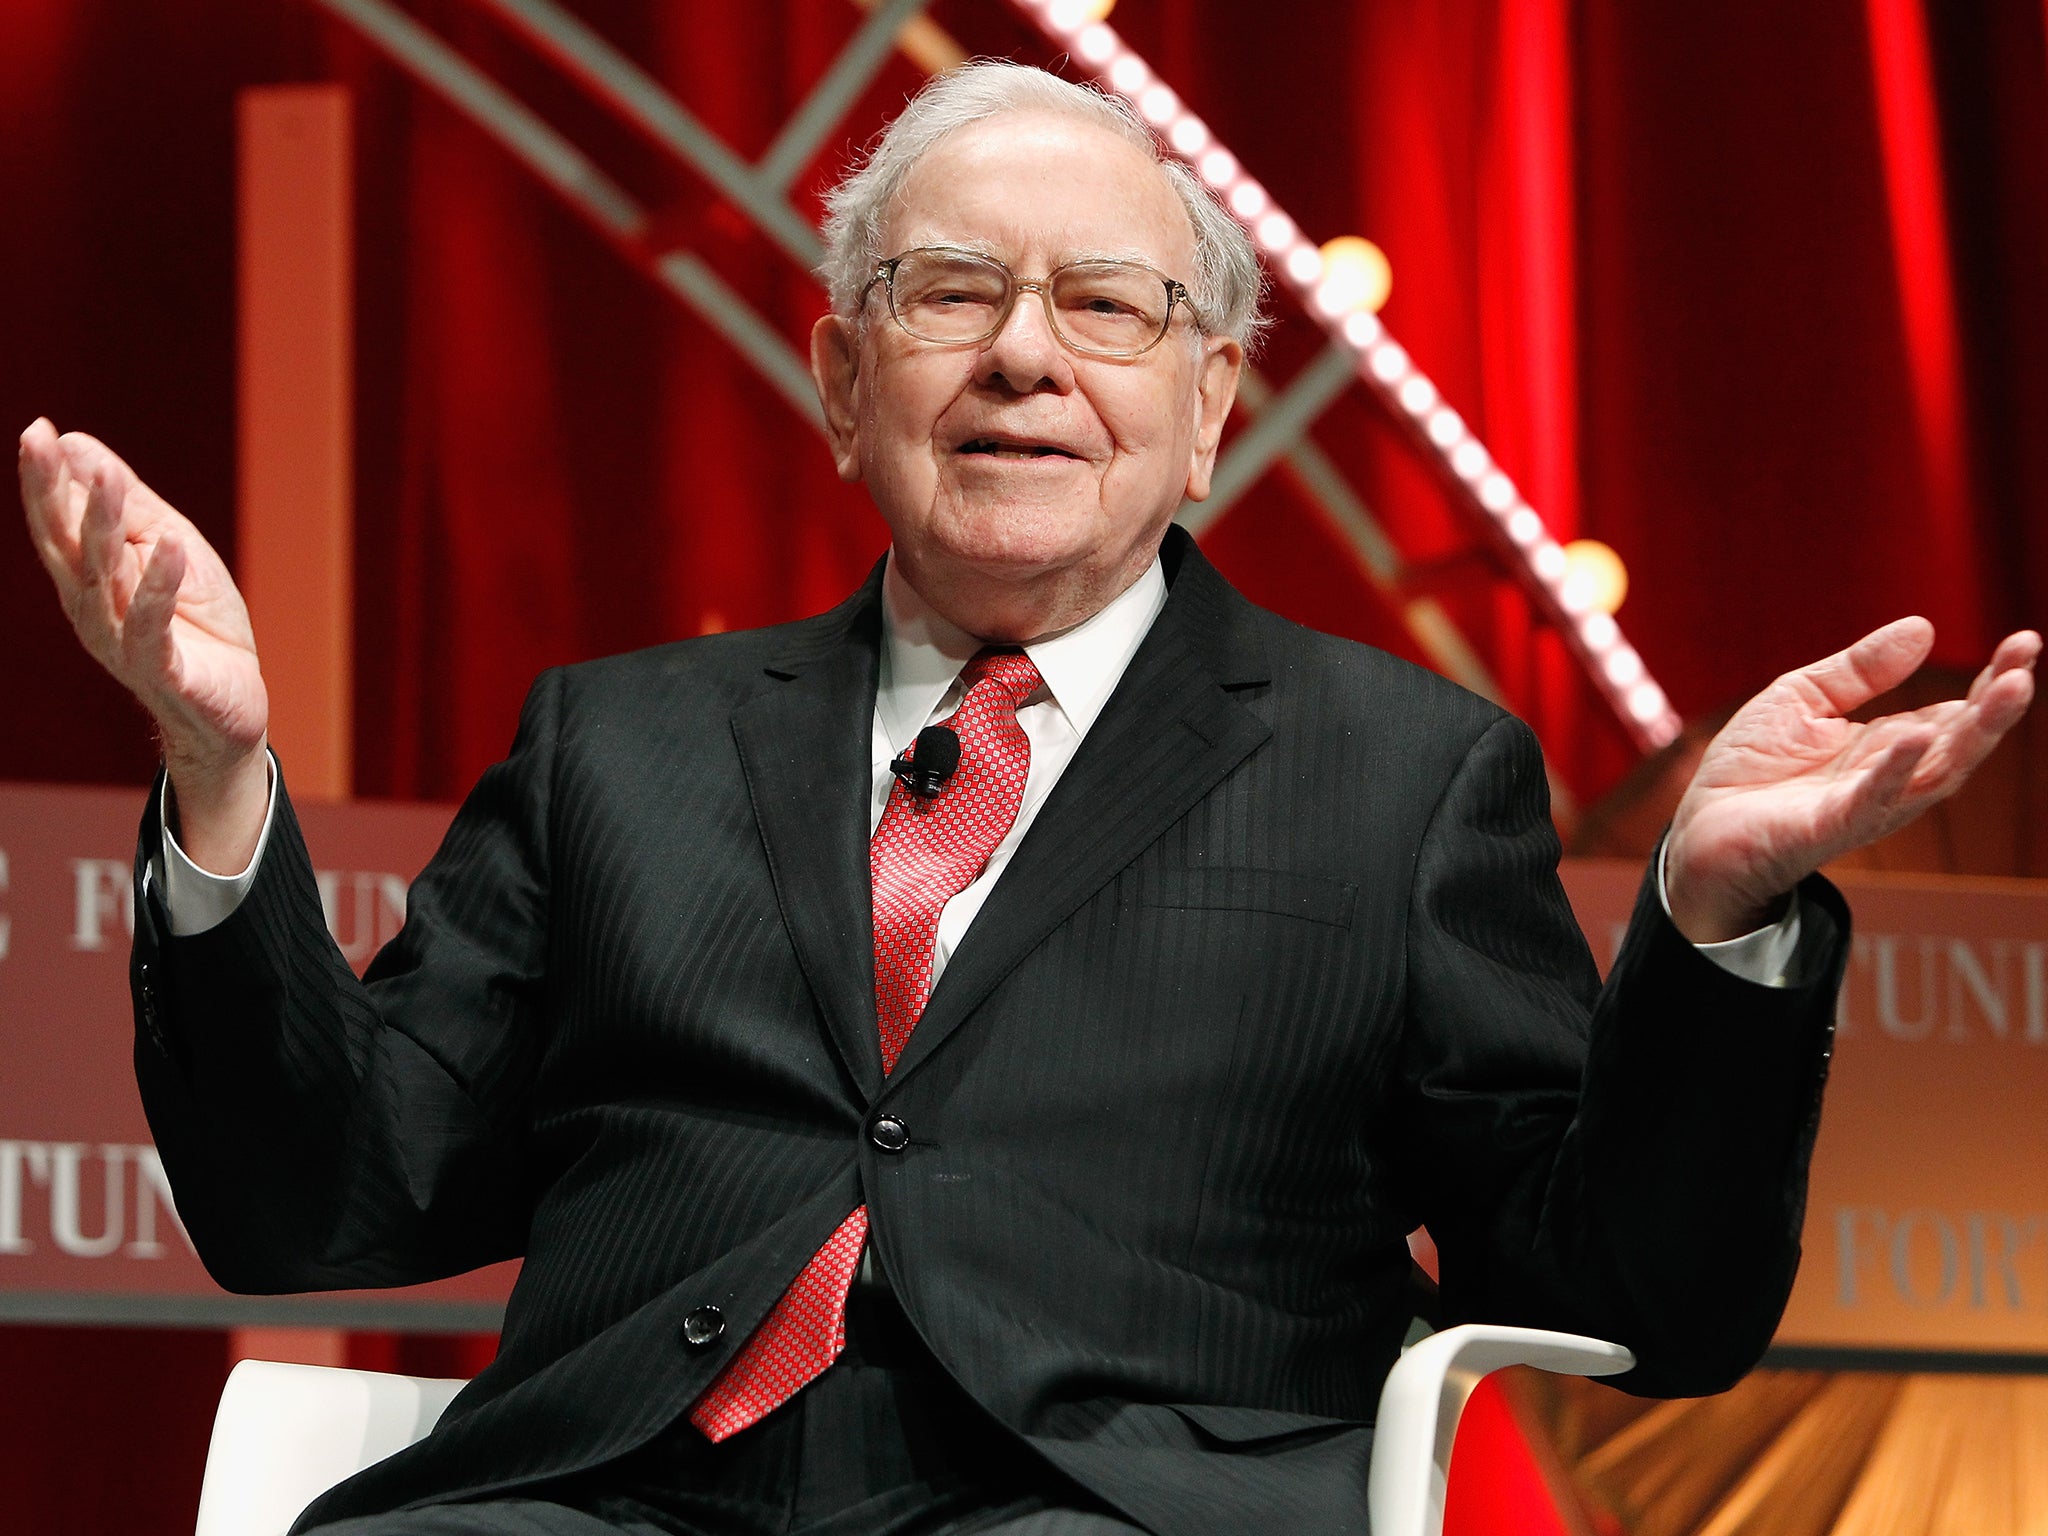 Buffett can encapsulate huge global investment puzzles in a few choice words